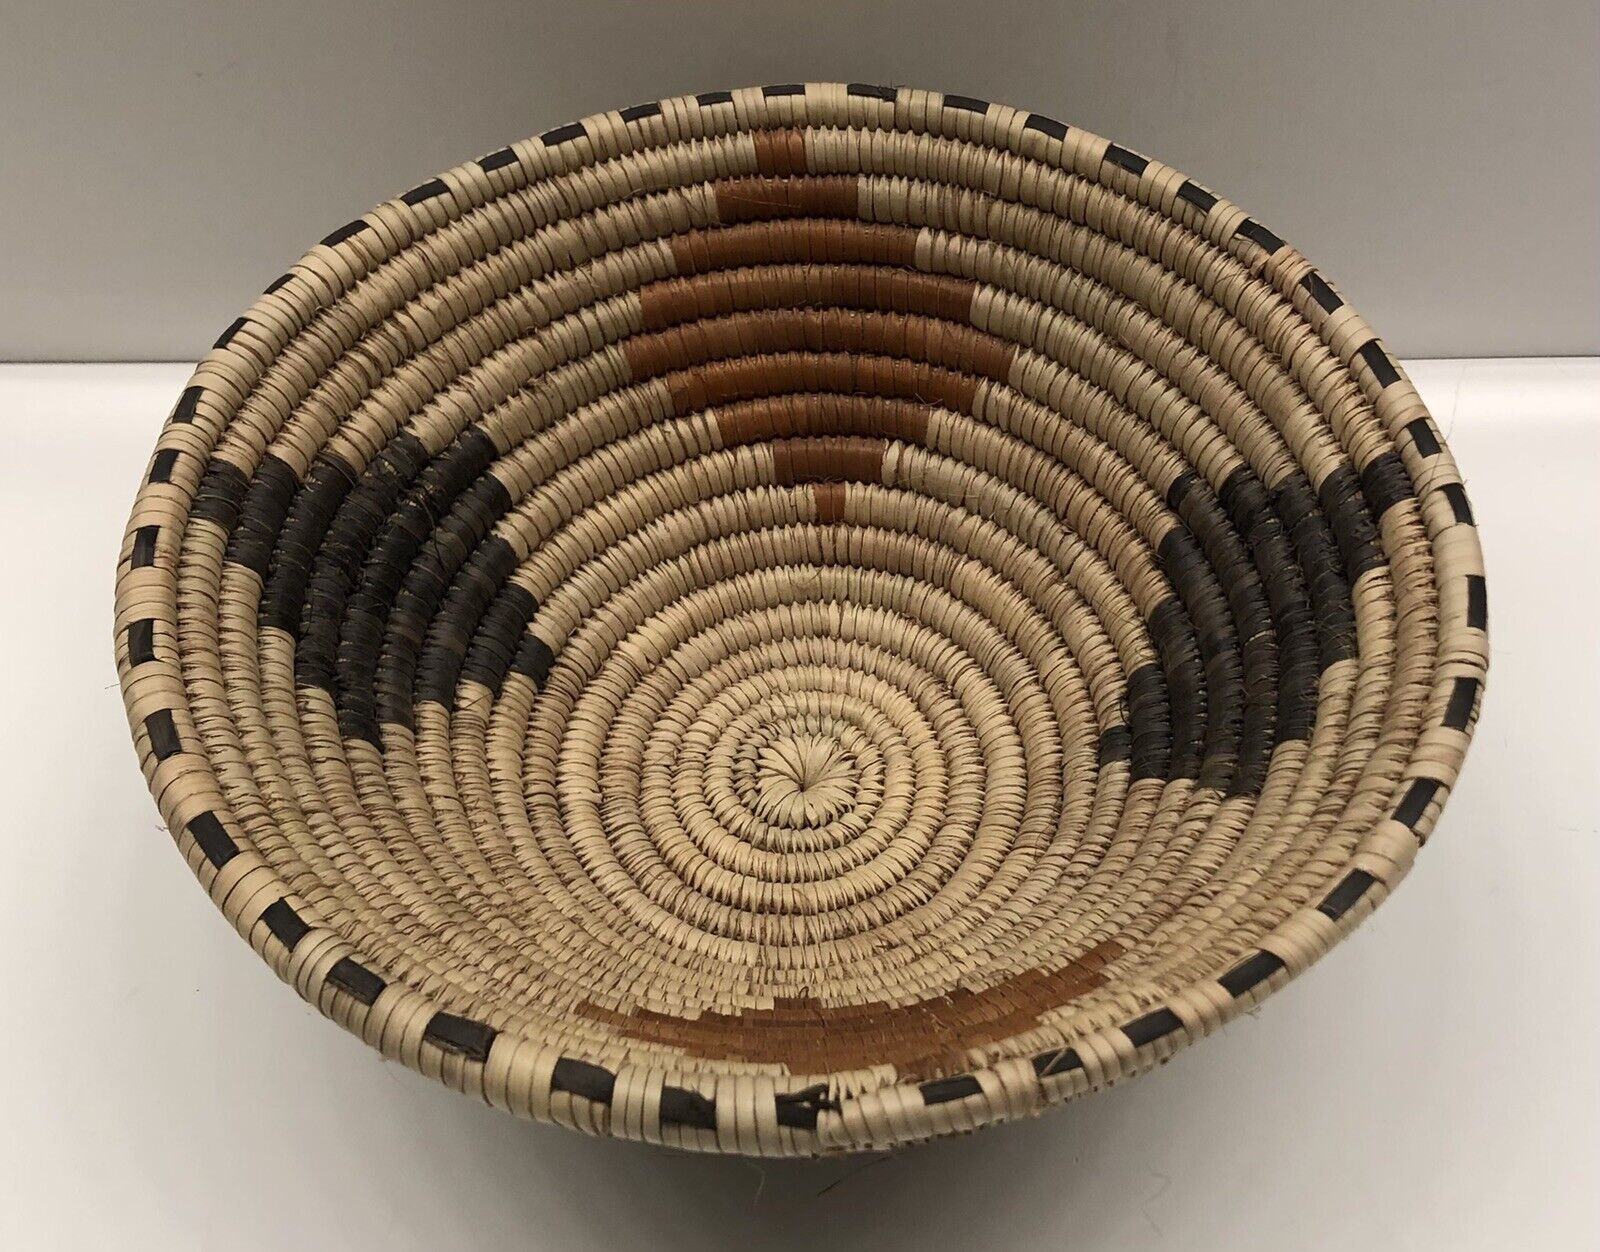 African Art Hand Coiled Woven Bowl Basket Geometric Design Palm Leaves